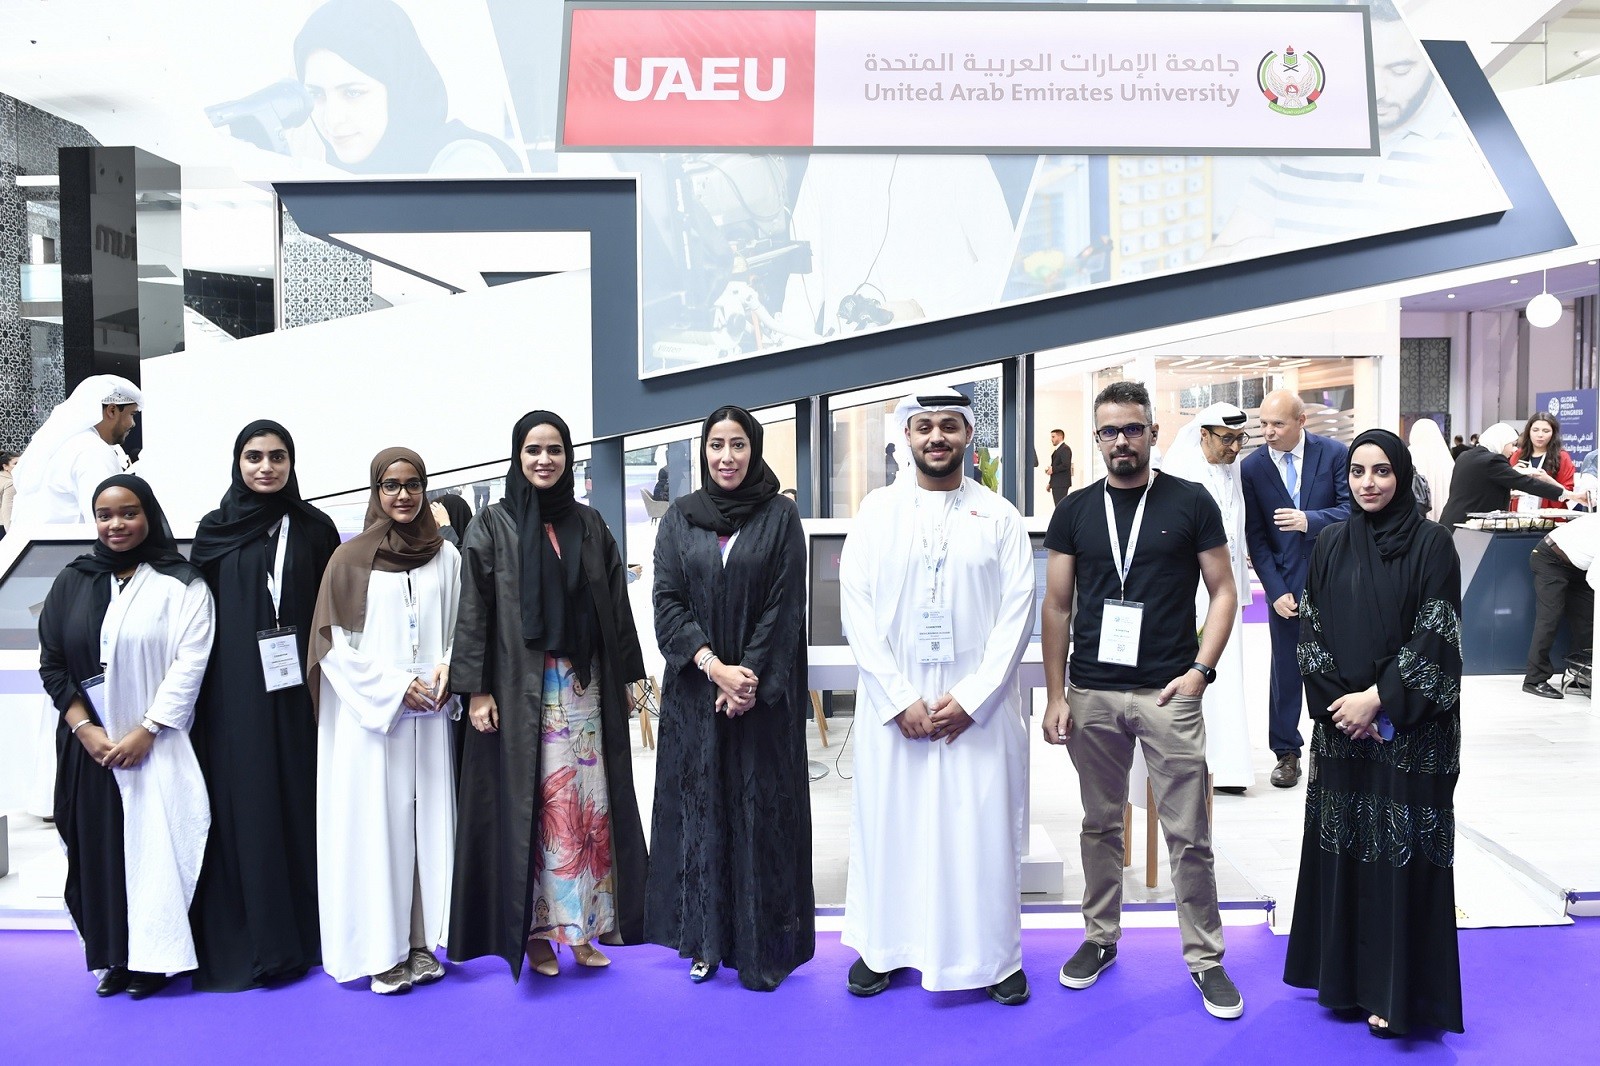 UAE University organizes panel discussions and displays media innovations during the Global Media Congress 2022